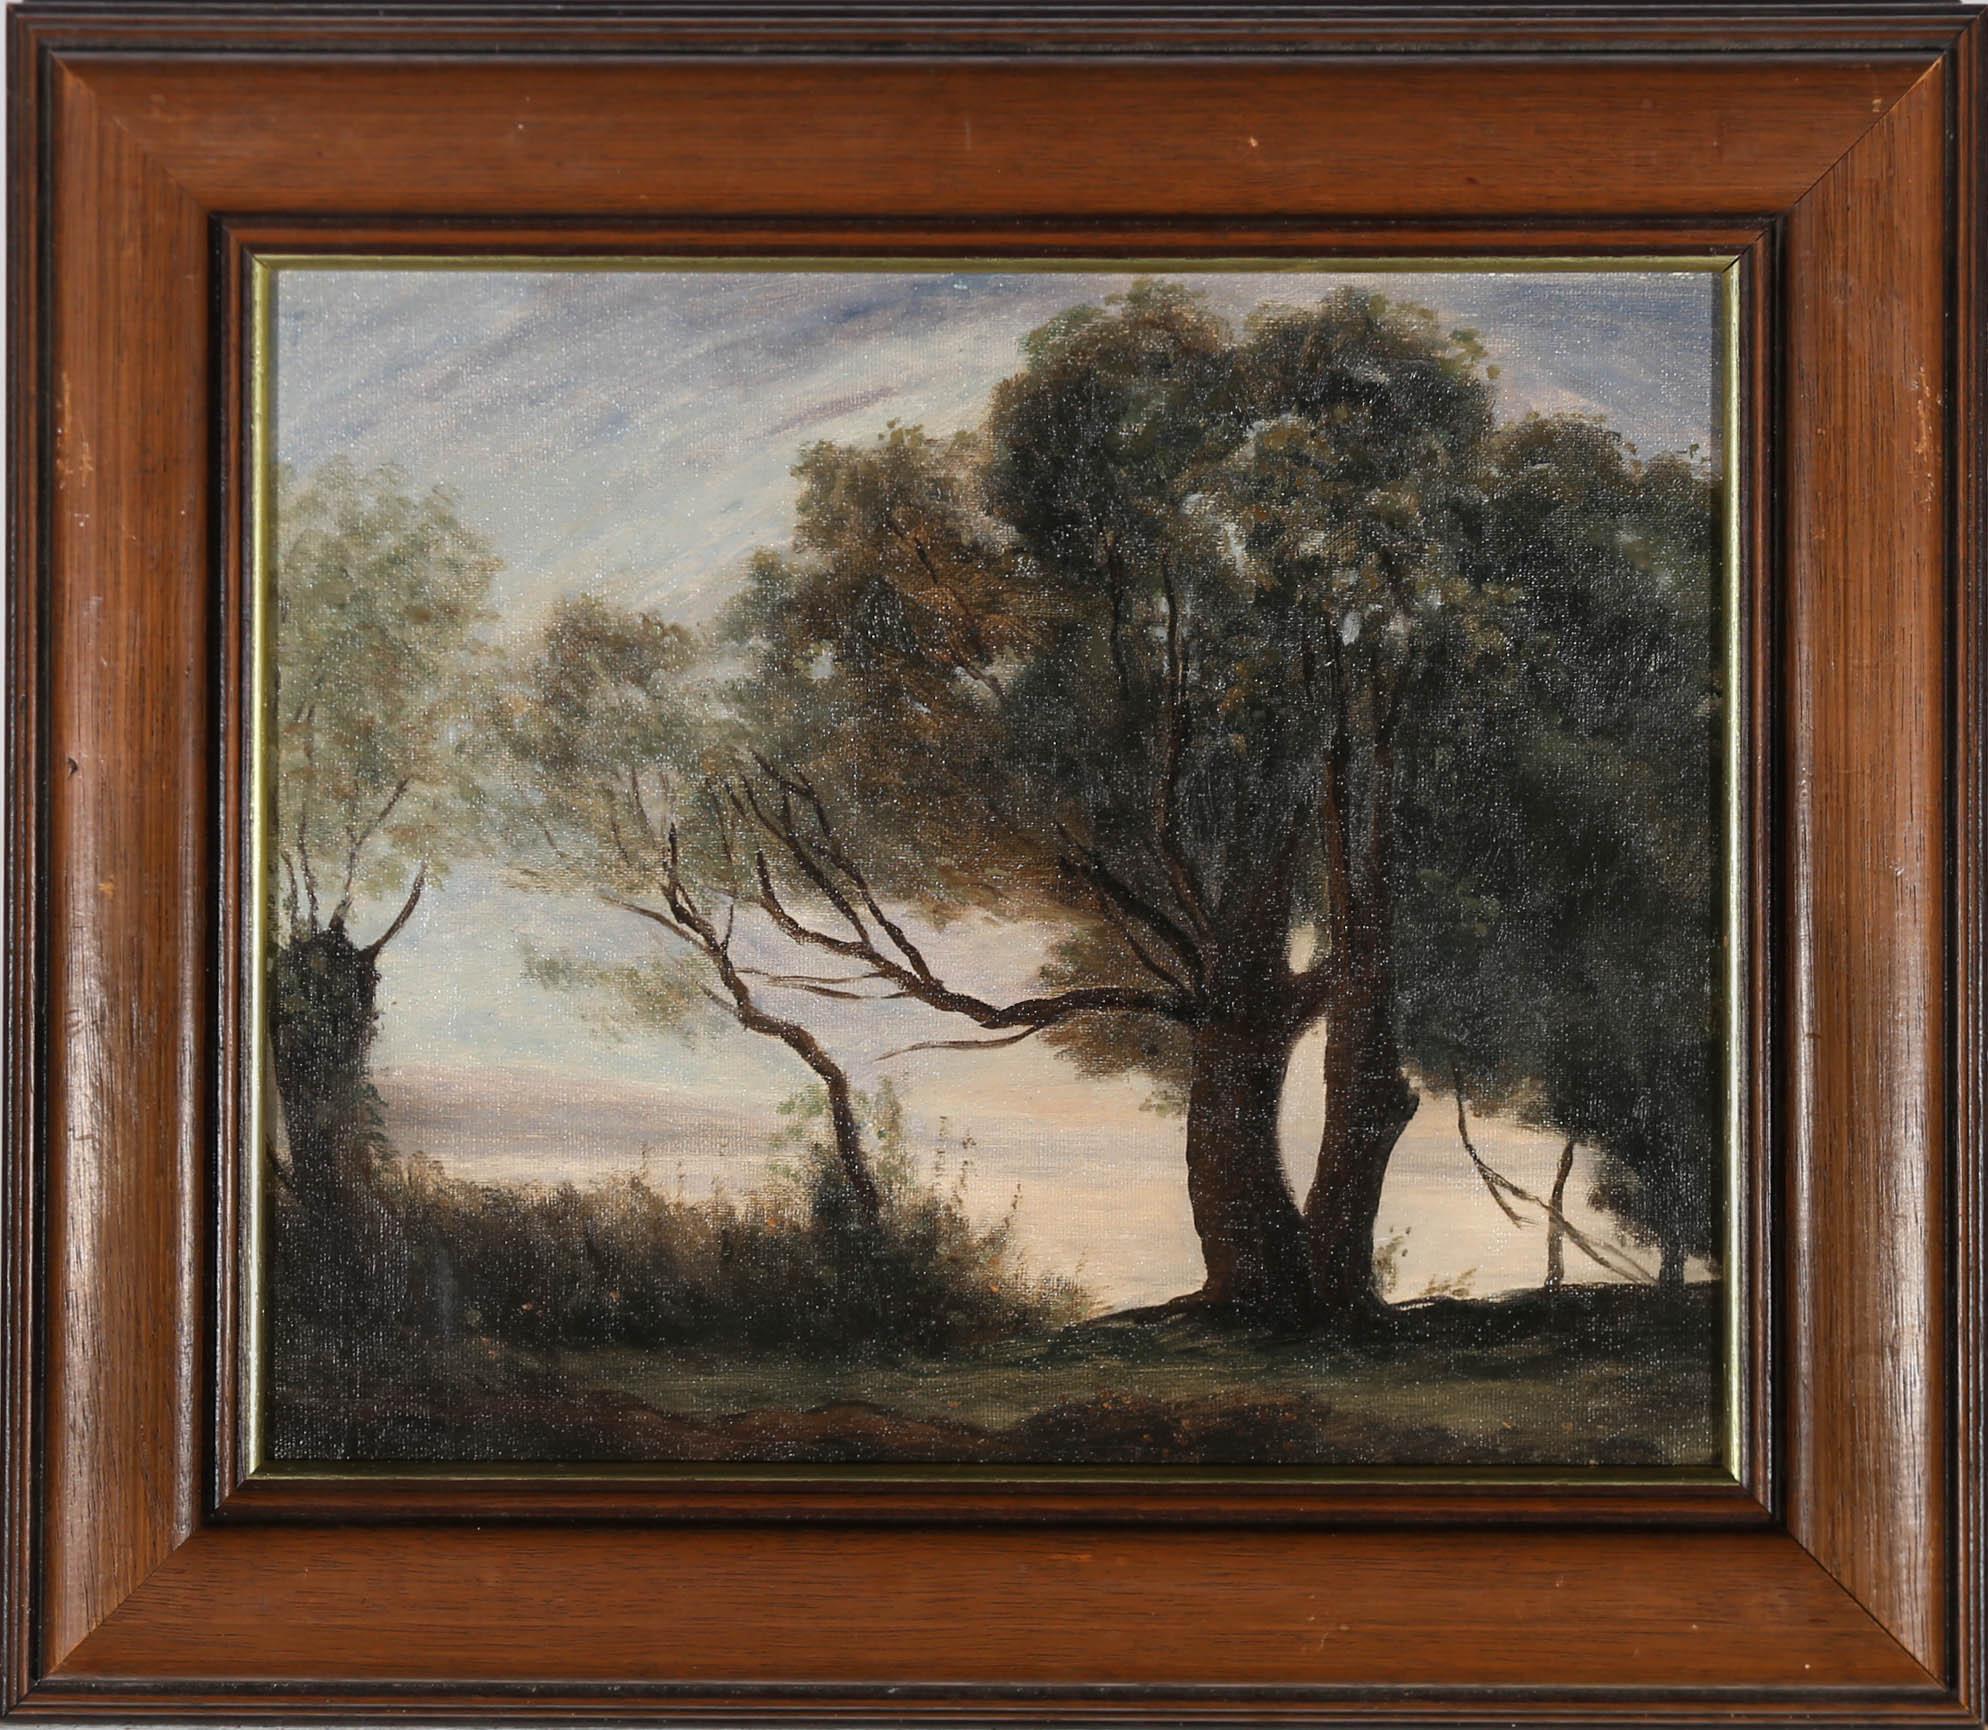 In the manner of Jean-Baptiste-Camille Corot's- this original painting by John Foulger (1943-2007) depicts softly painted trees with a distant view. Beautifully mounted in an attractive wood frame with gilt. Unsigned. On canvas board.